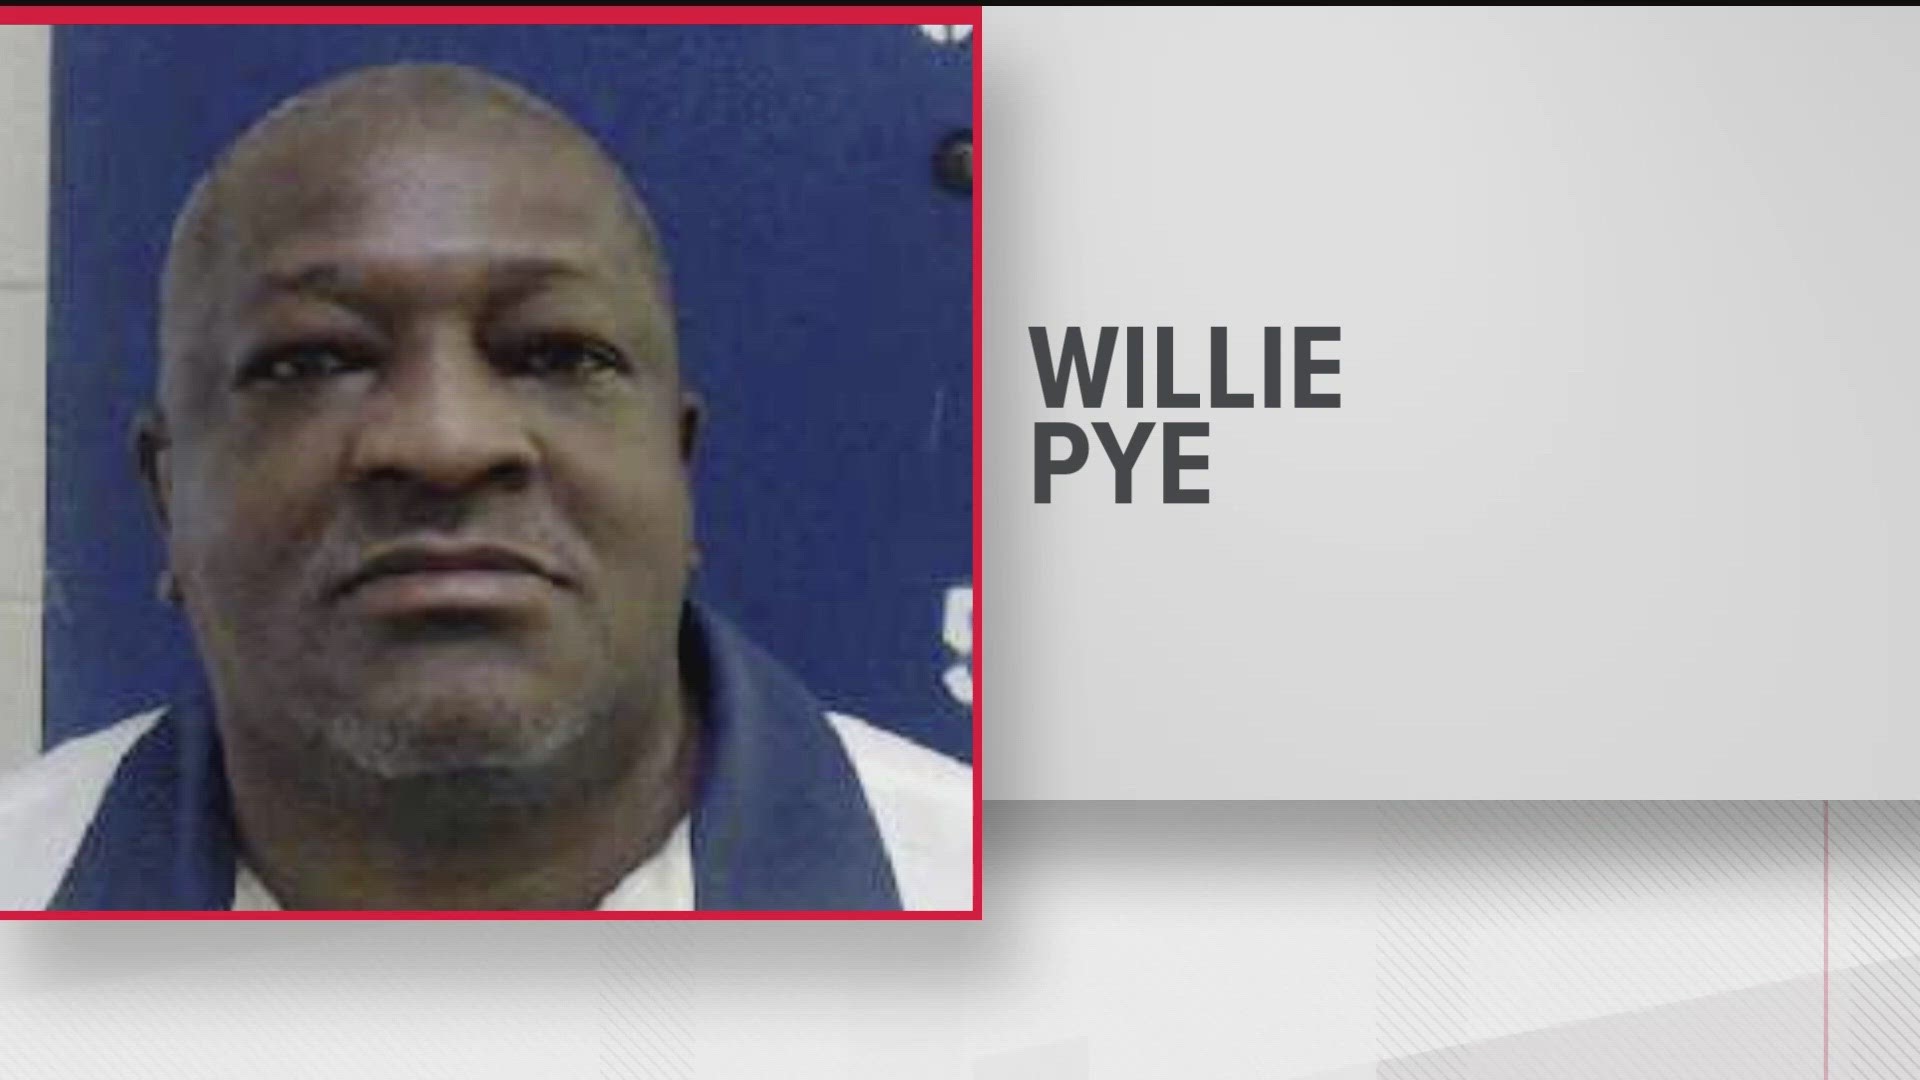 A judge has signed an execution order for 59-year-old Willie Pye.